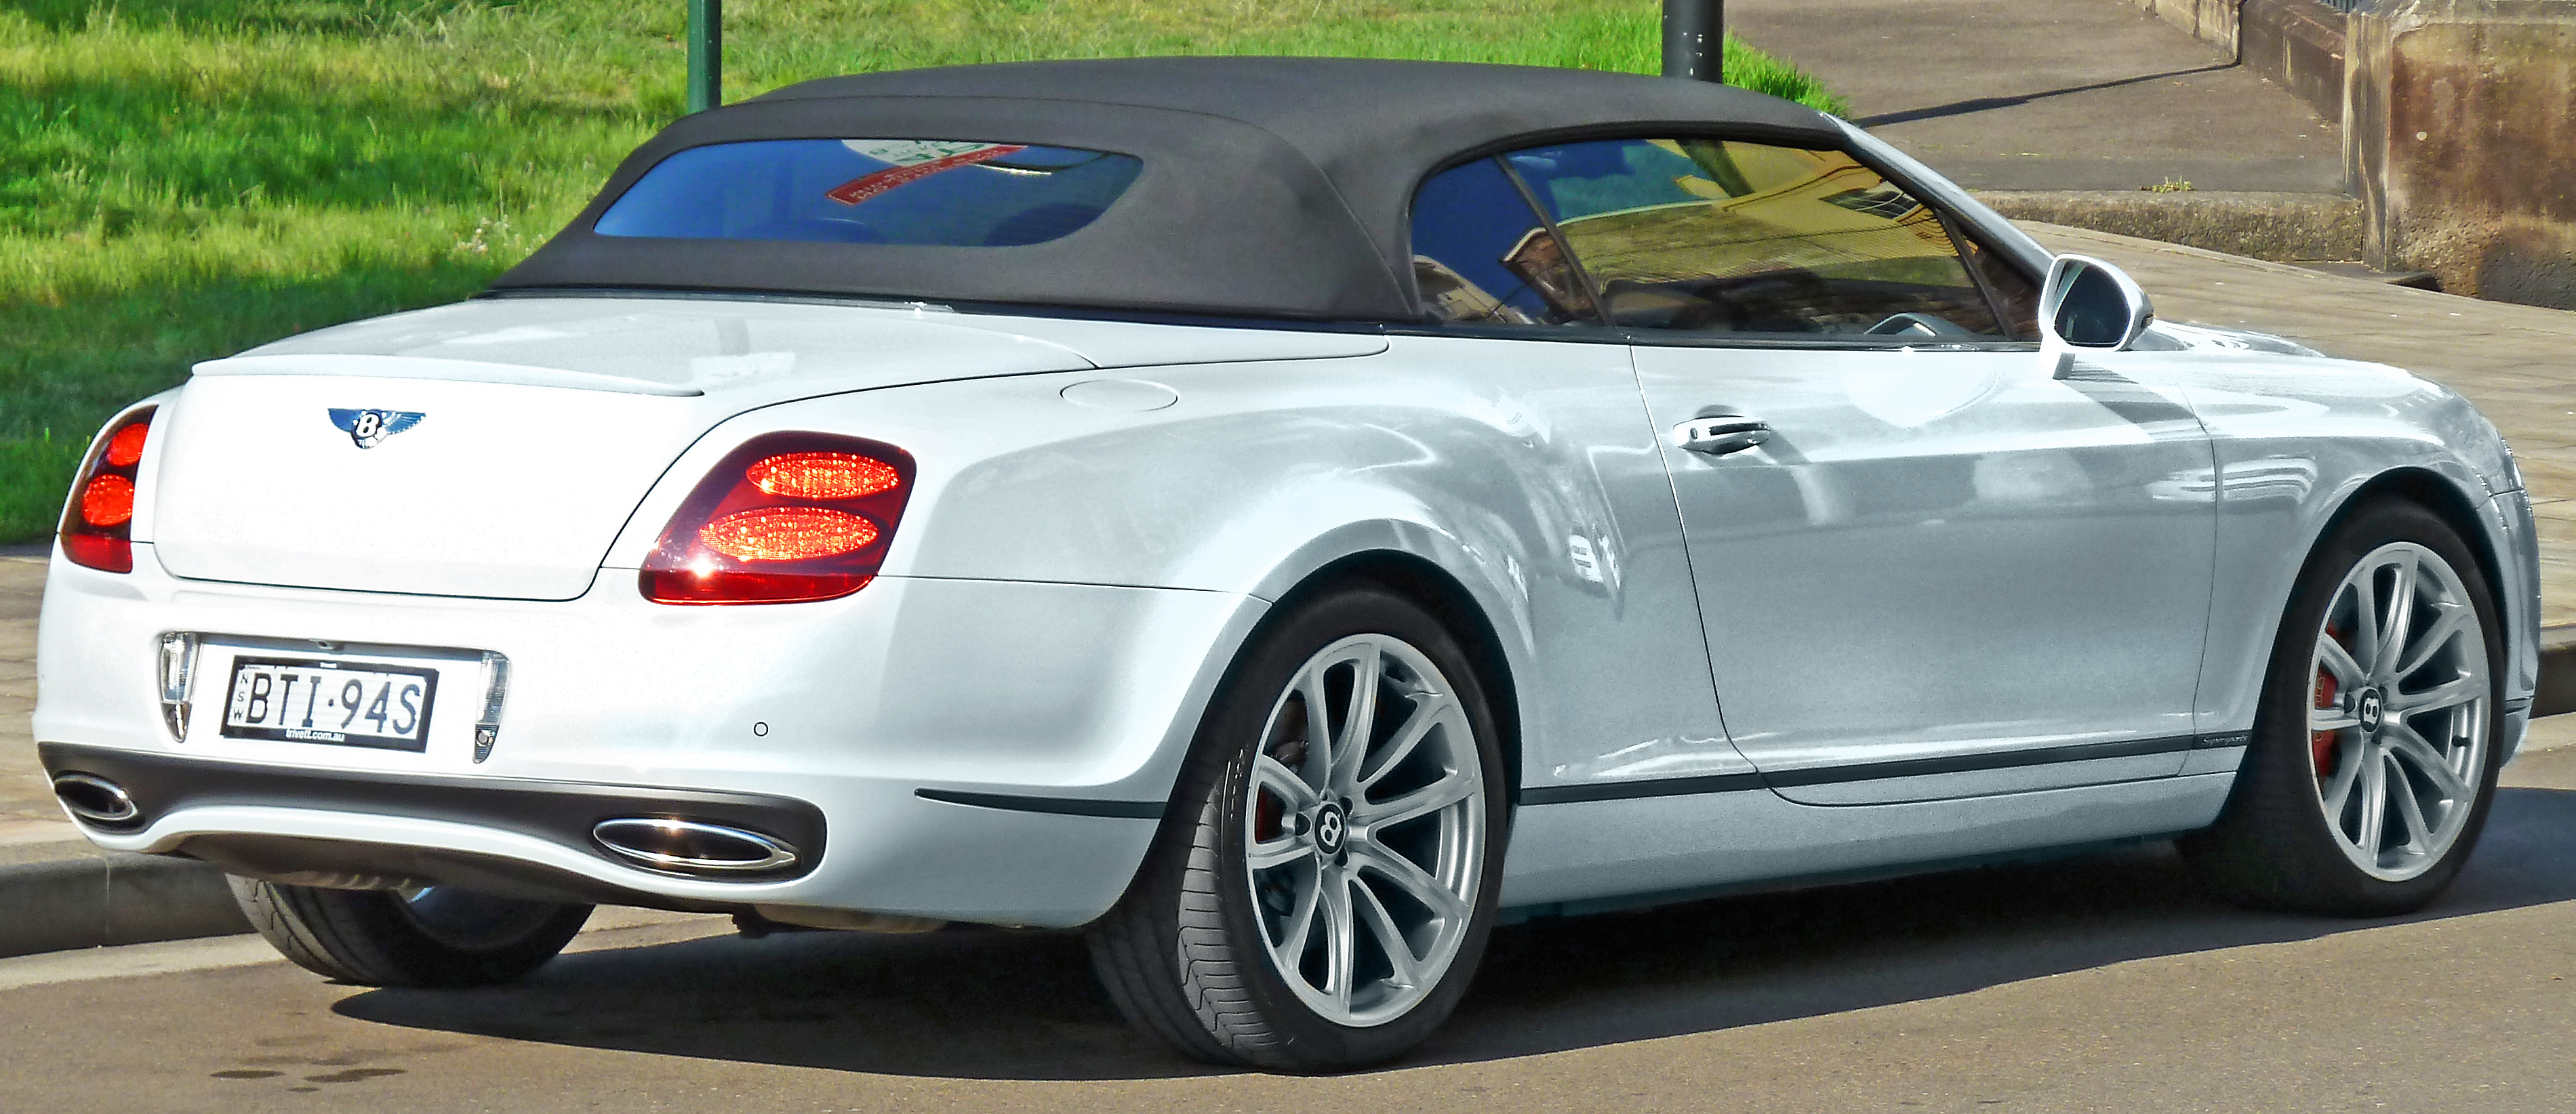 2010-2011 Bentley Continental (3W) Supersports convertible (2011-11-01) 02